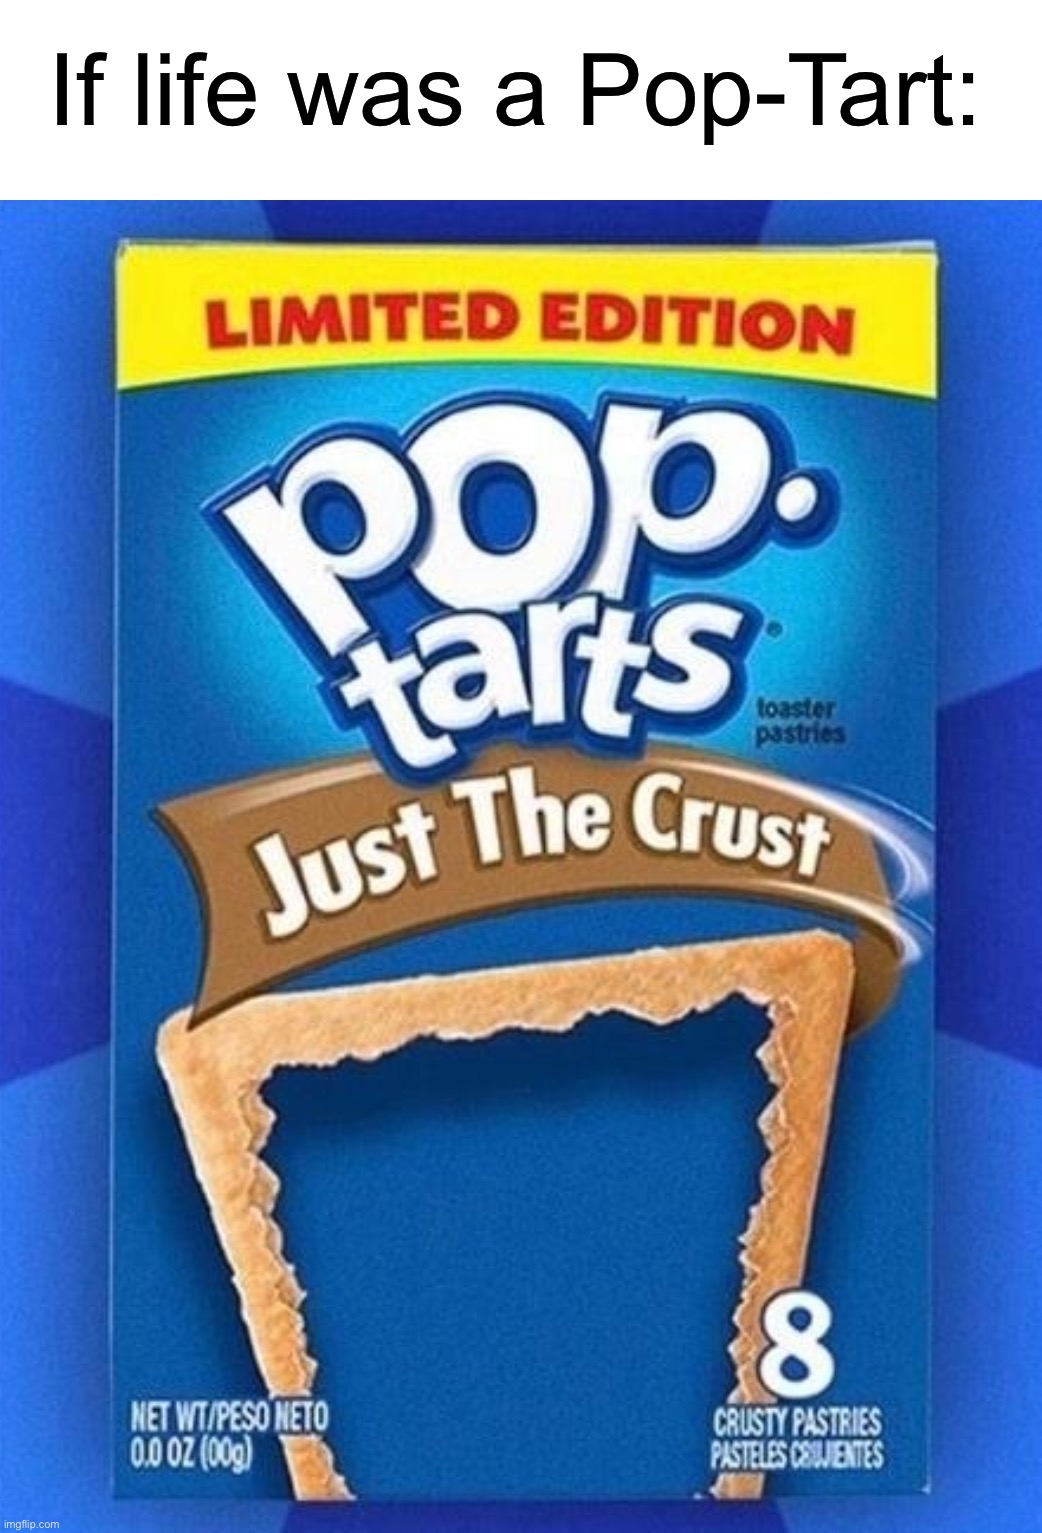 Sad but true |  If life was a Pop-Tart: | image tagged in memes,funny,pop tarts,sad,true story,pain | made w/ Imgflip meme maker